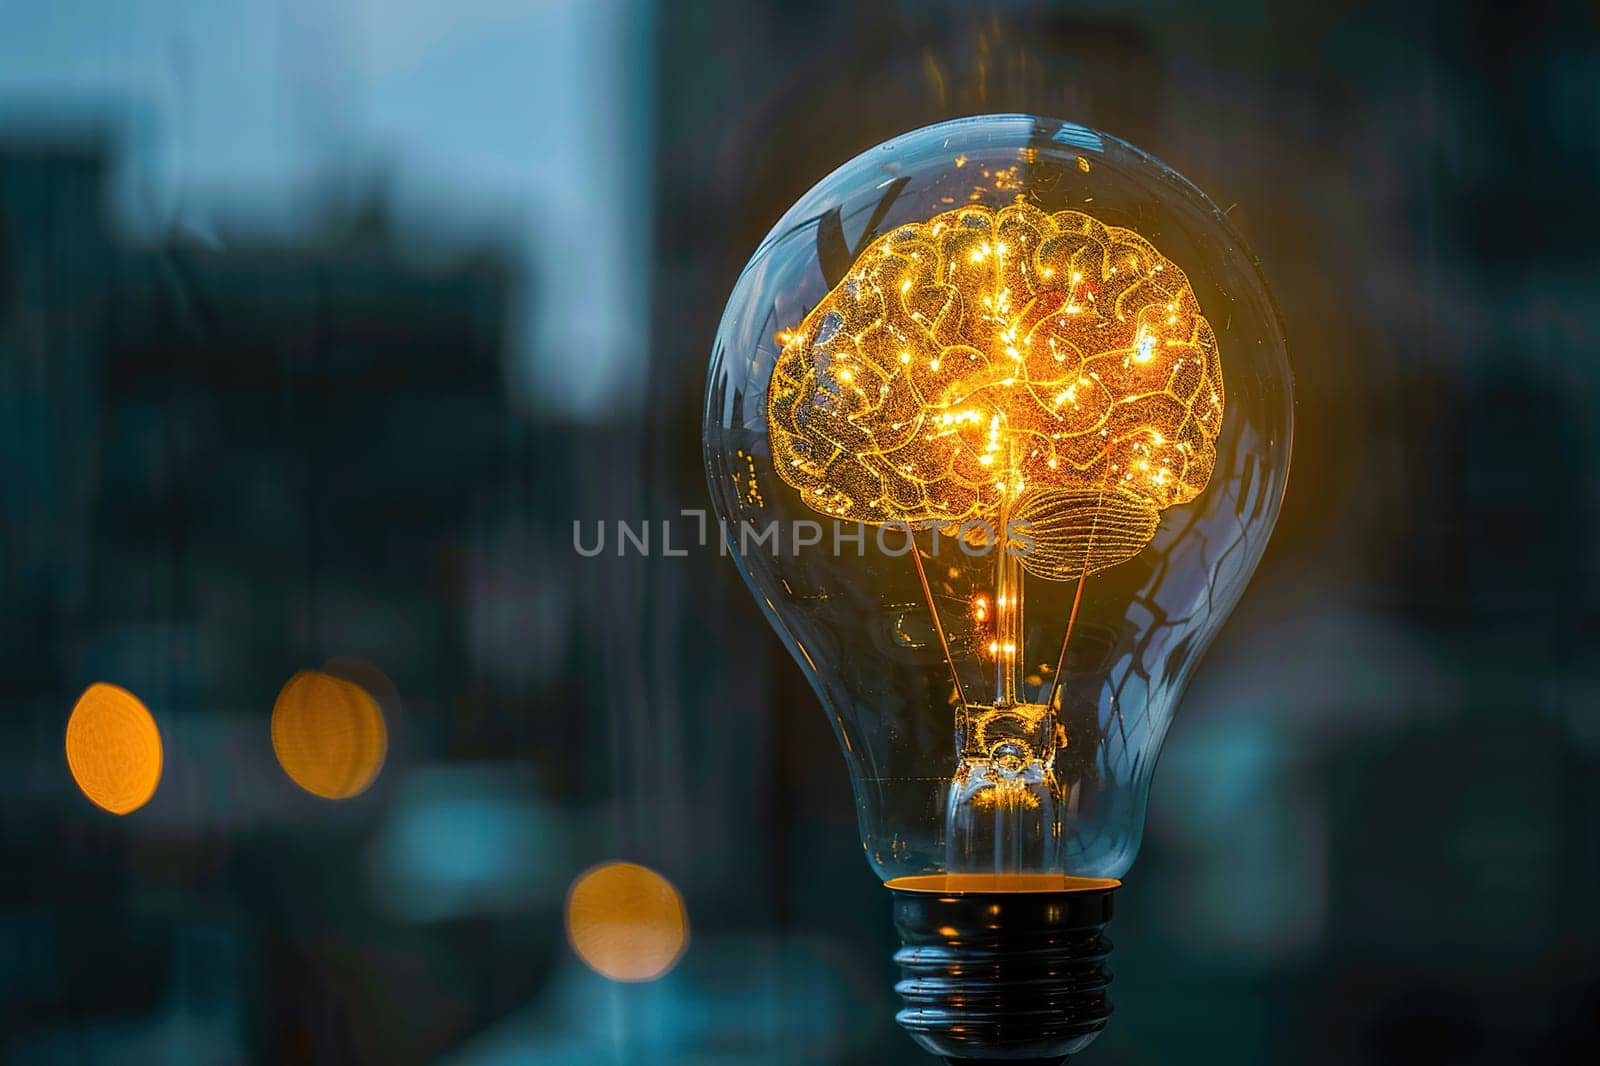 Light bulb with a picture of a brain inside in a yellow glow on a blurred background.